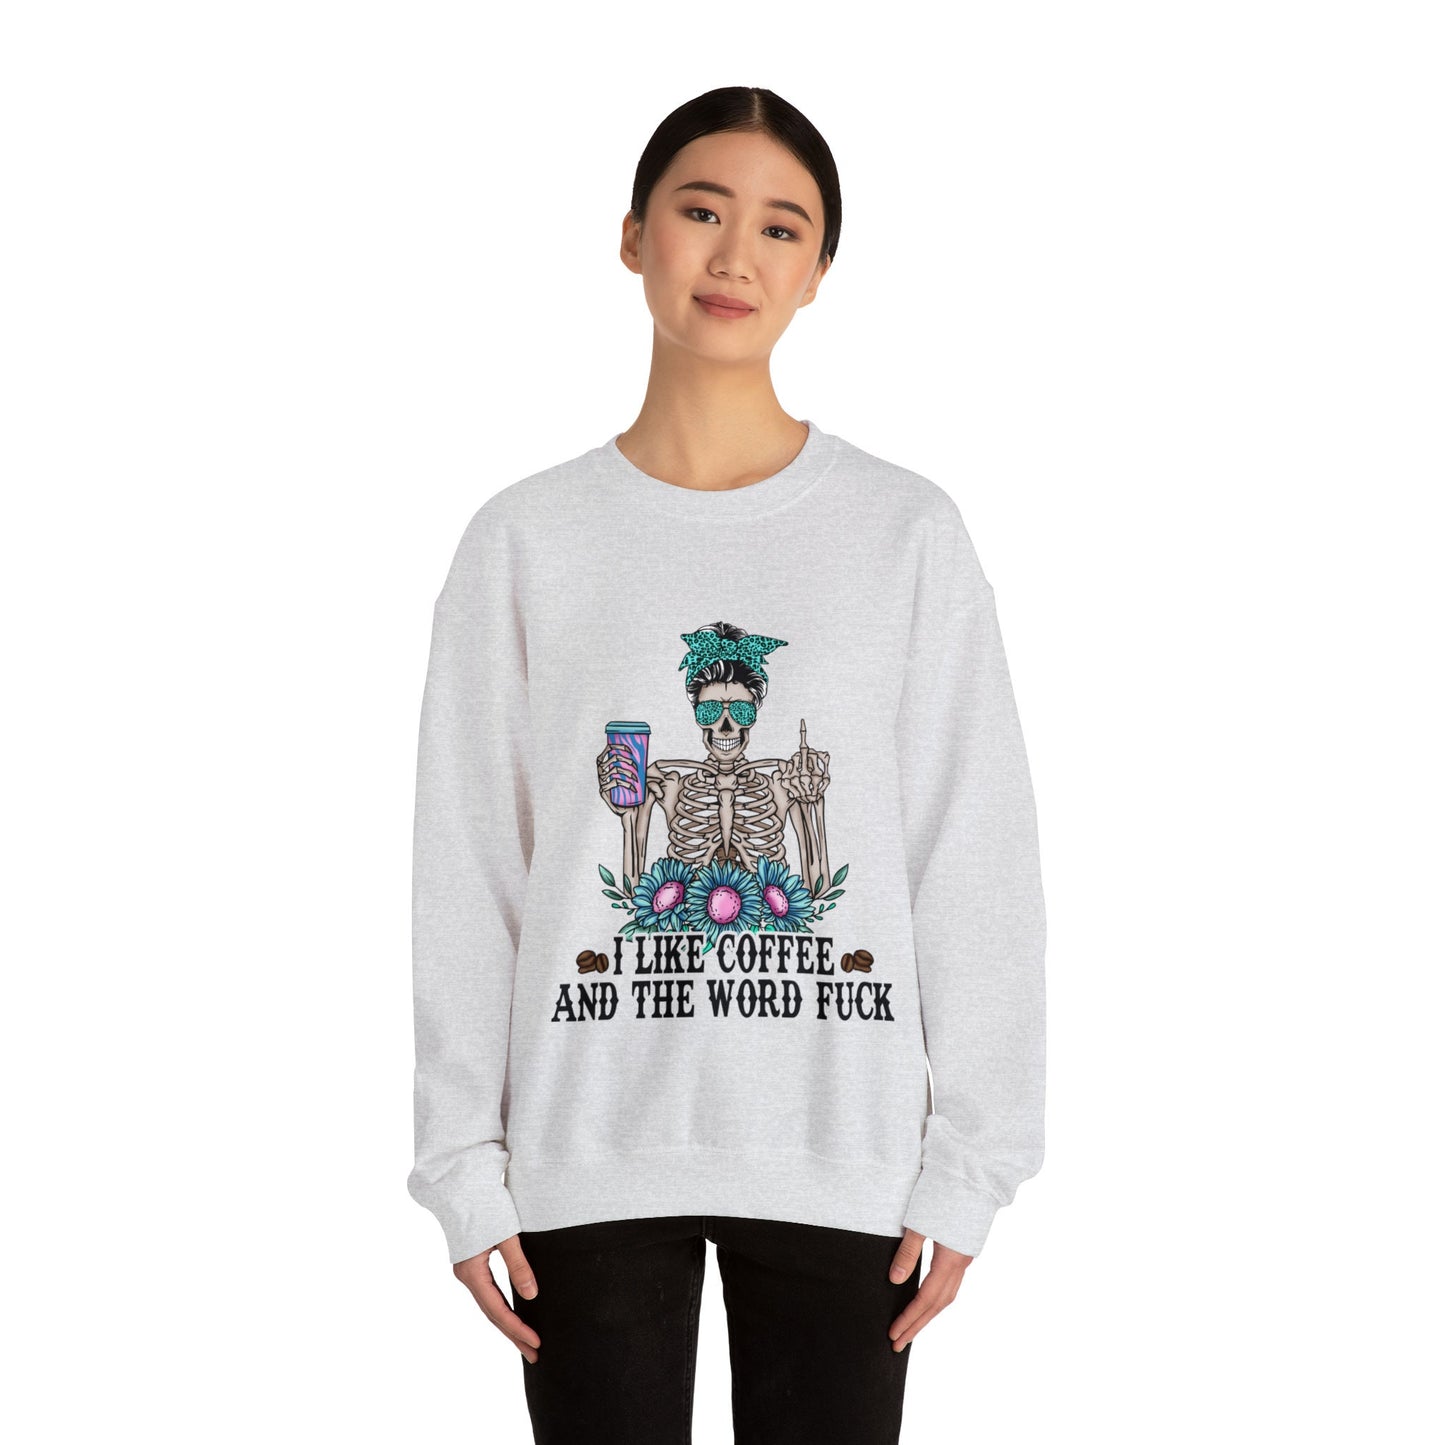 Caffeine-Infused Halloween Sweatshirt - Coffee Lover's Delight with a Bold Statement